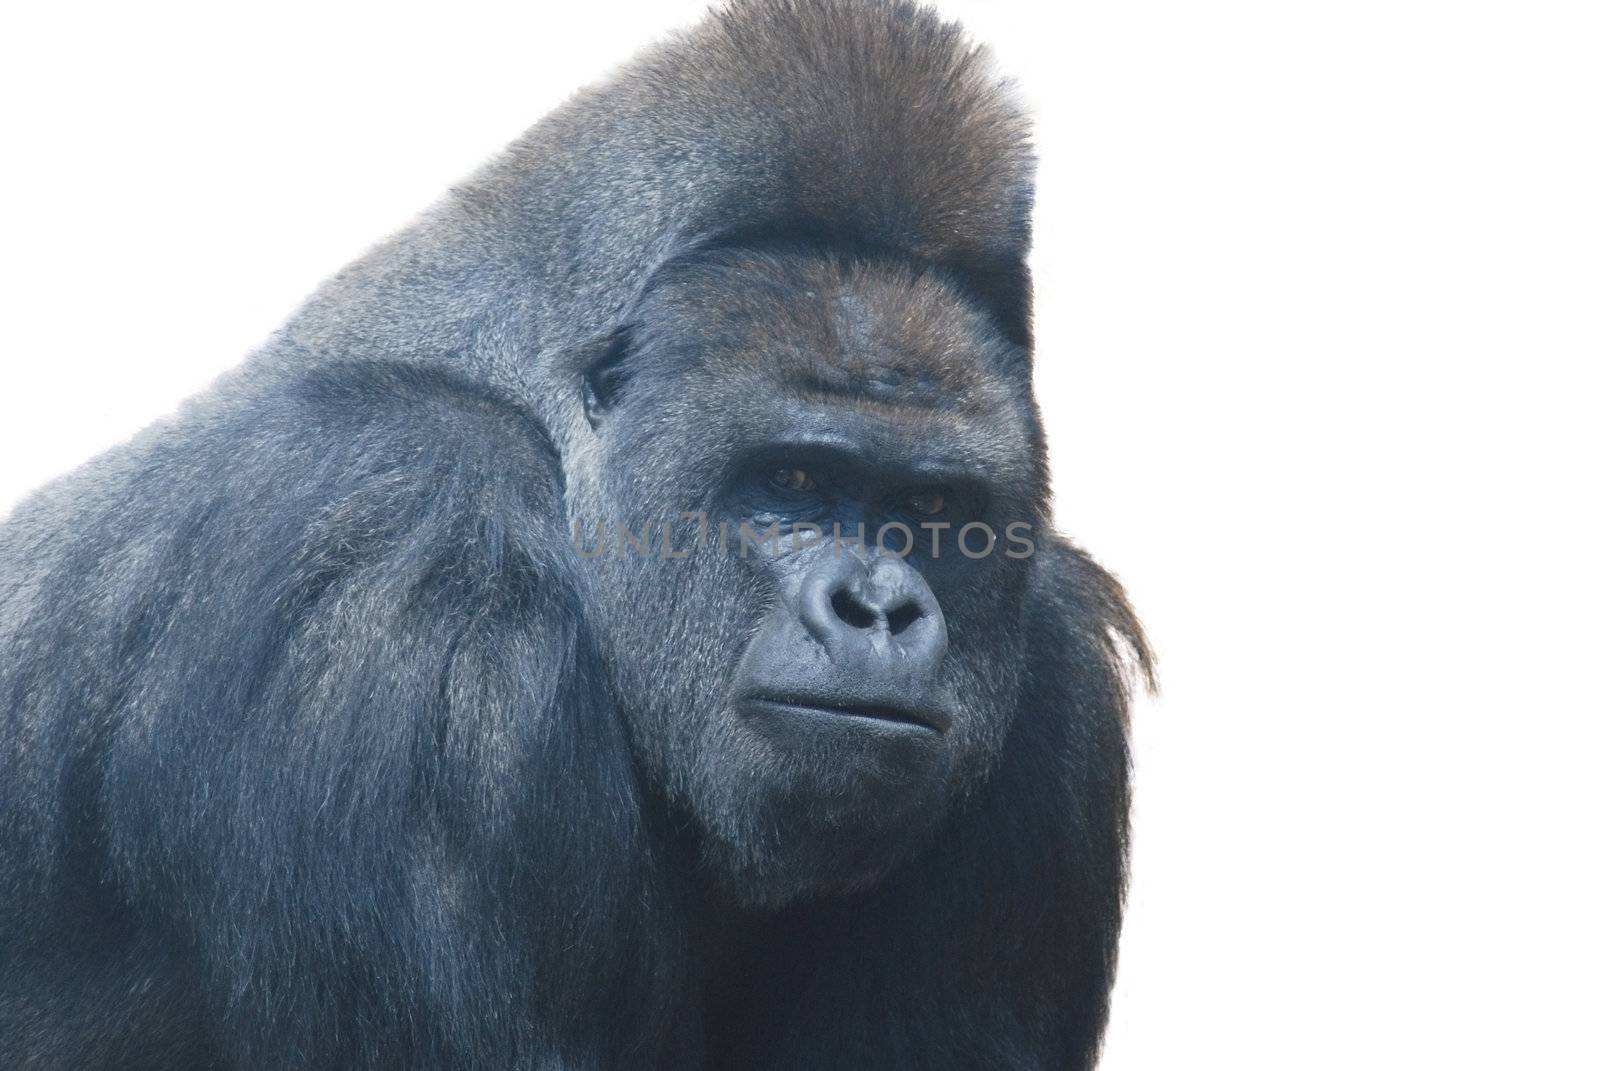 close up of a big black hairy gorilla isolated on white